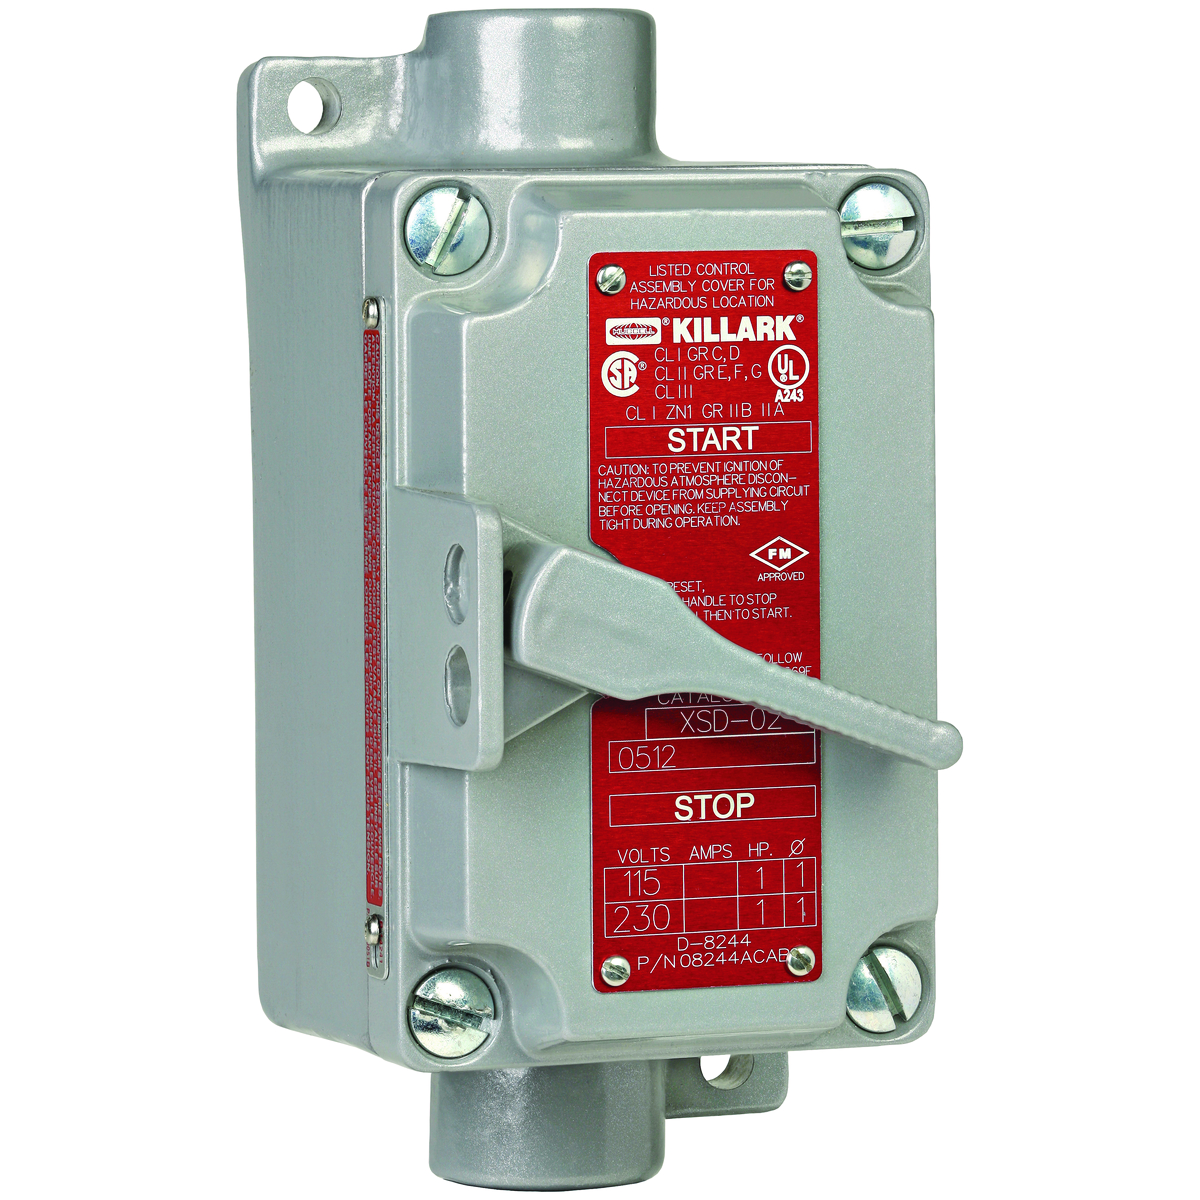 XSD SERIES - ALUMINUM FEED-THRU SINGLE GANG 2-POLE, SINGLE PHASE MANUALMOTOR STARTING SWITCH UNIT - WITH OVERLOAD PROTECTION - HUB SIZE 1/2INCH